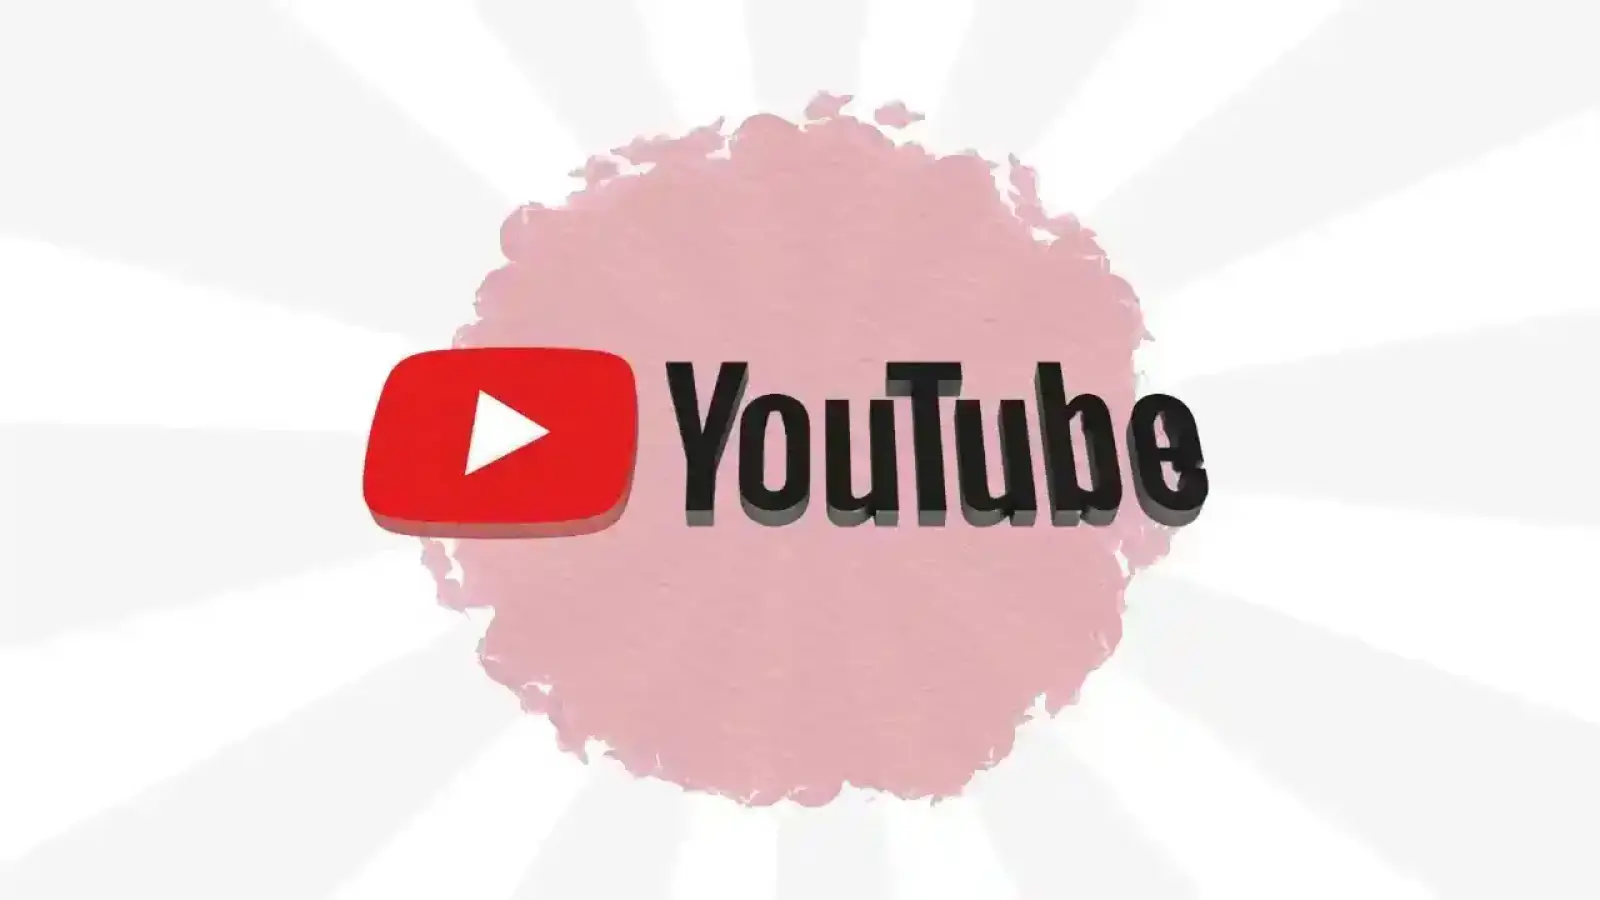 YouTube Update: New great AI feature is coming, no less than a gift for creators